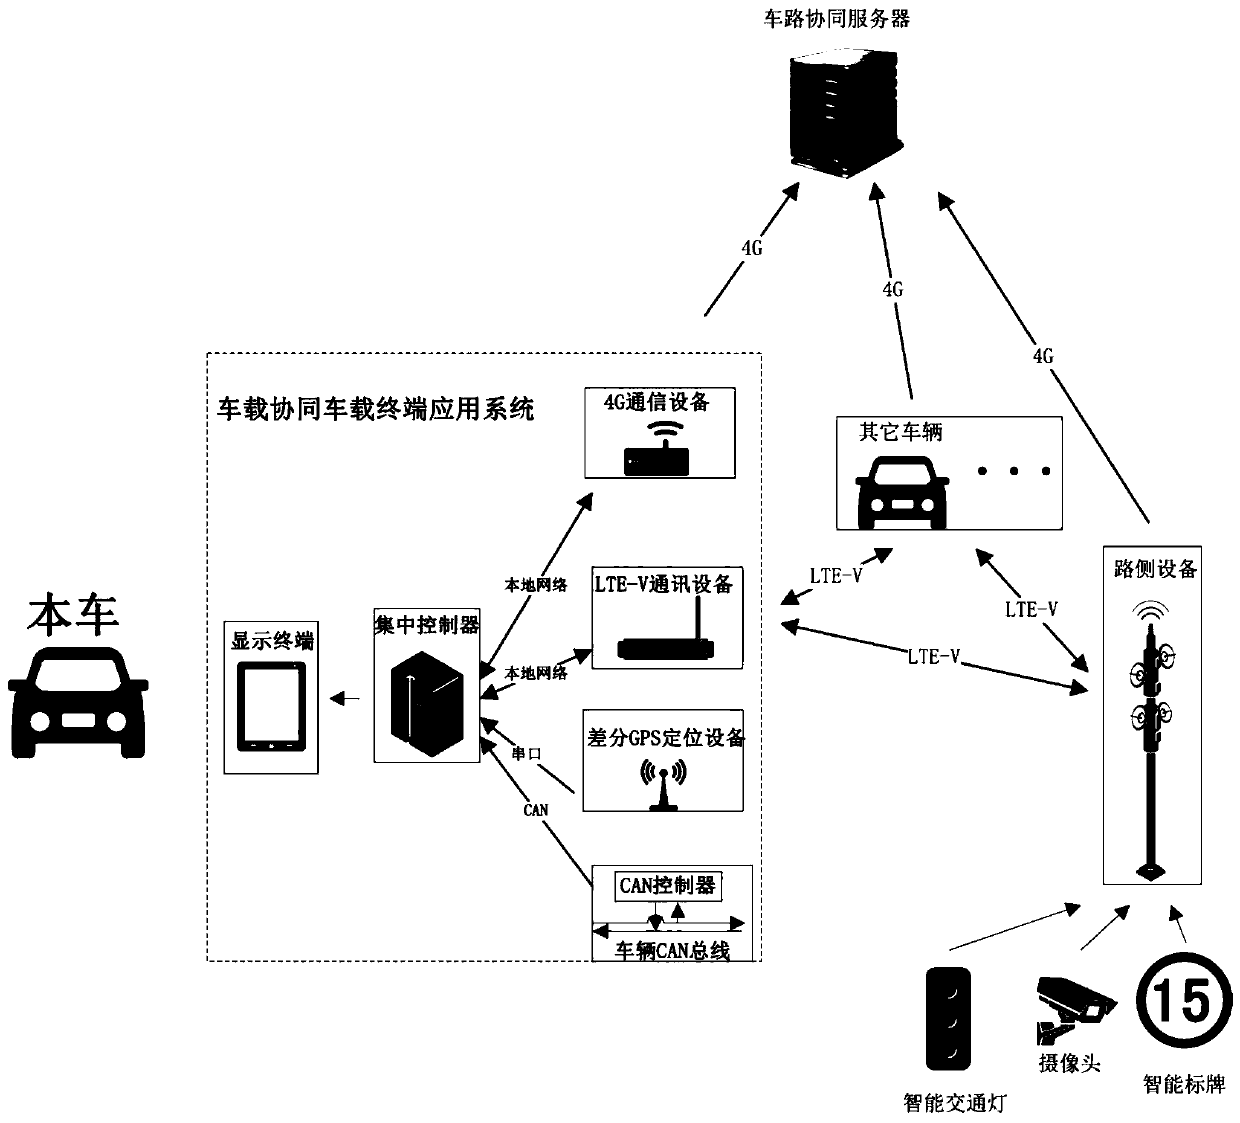 vehicle-road collaborative vehicle-mounted terminal application system based on LTE-V